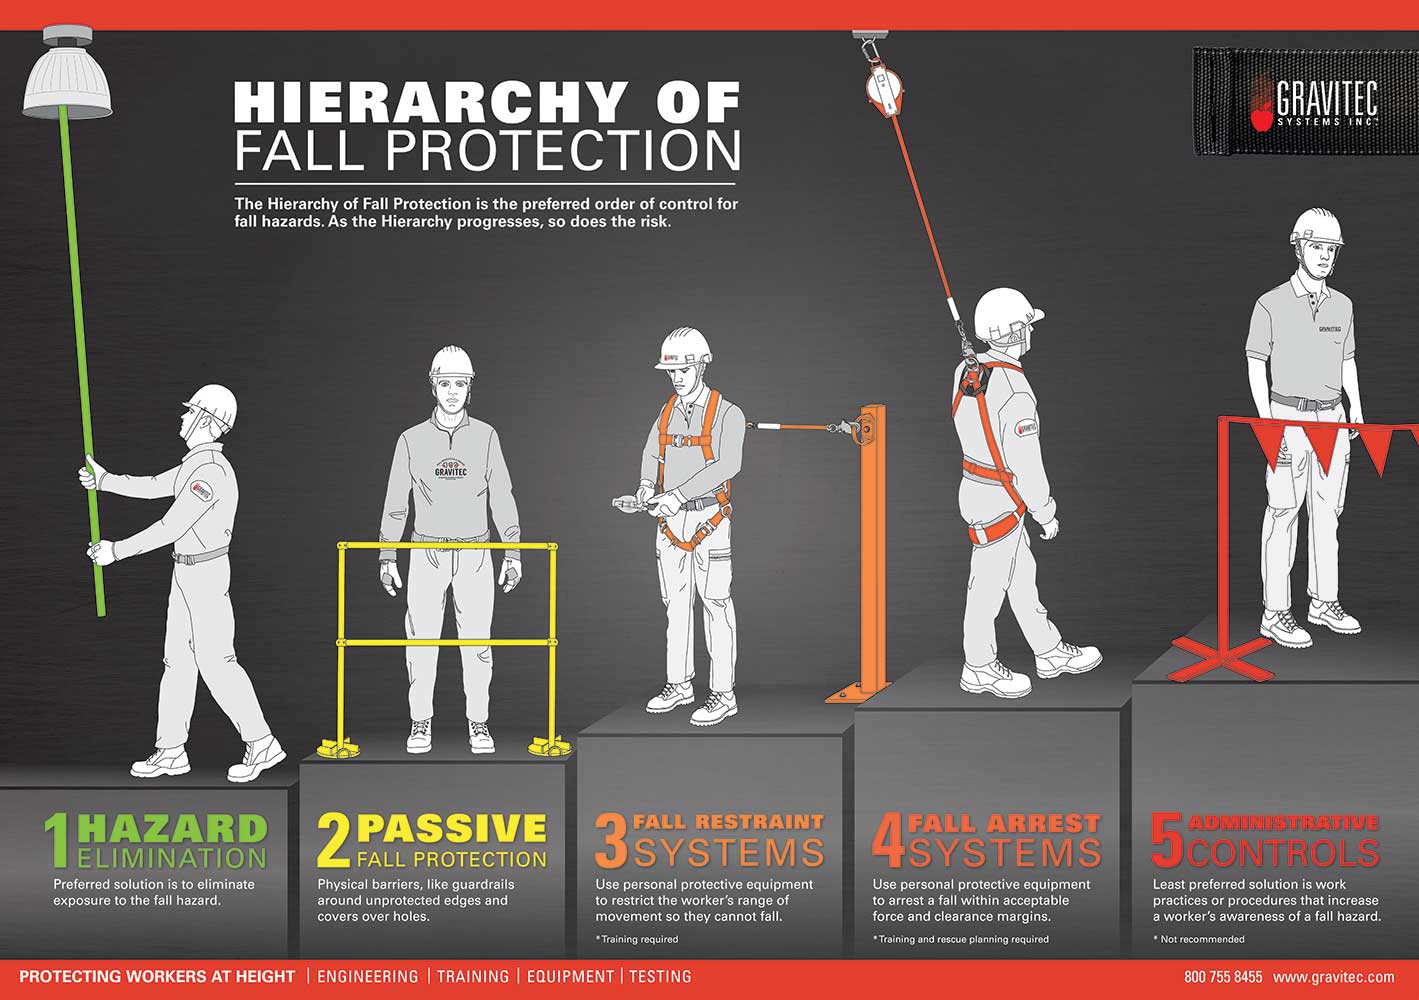 Image illustrating the five types of fall protection in order of decreasing safety